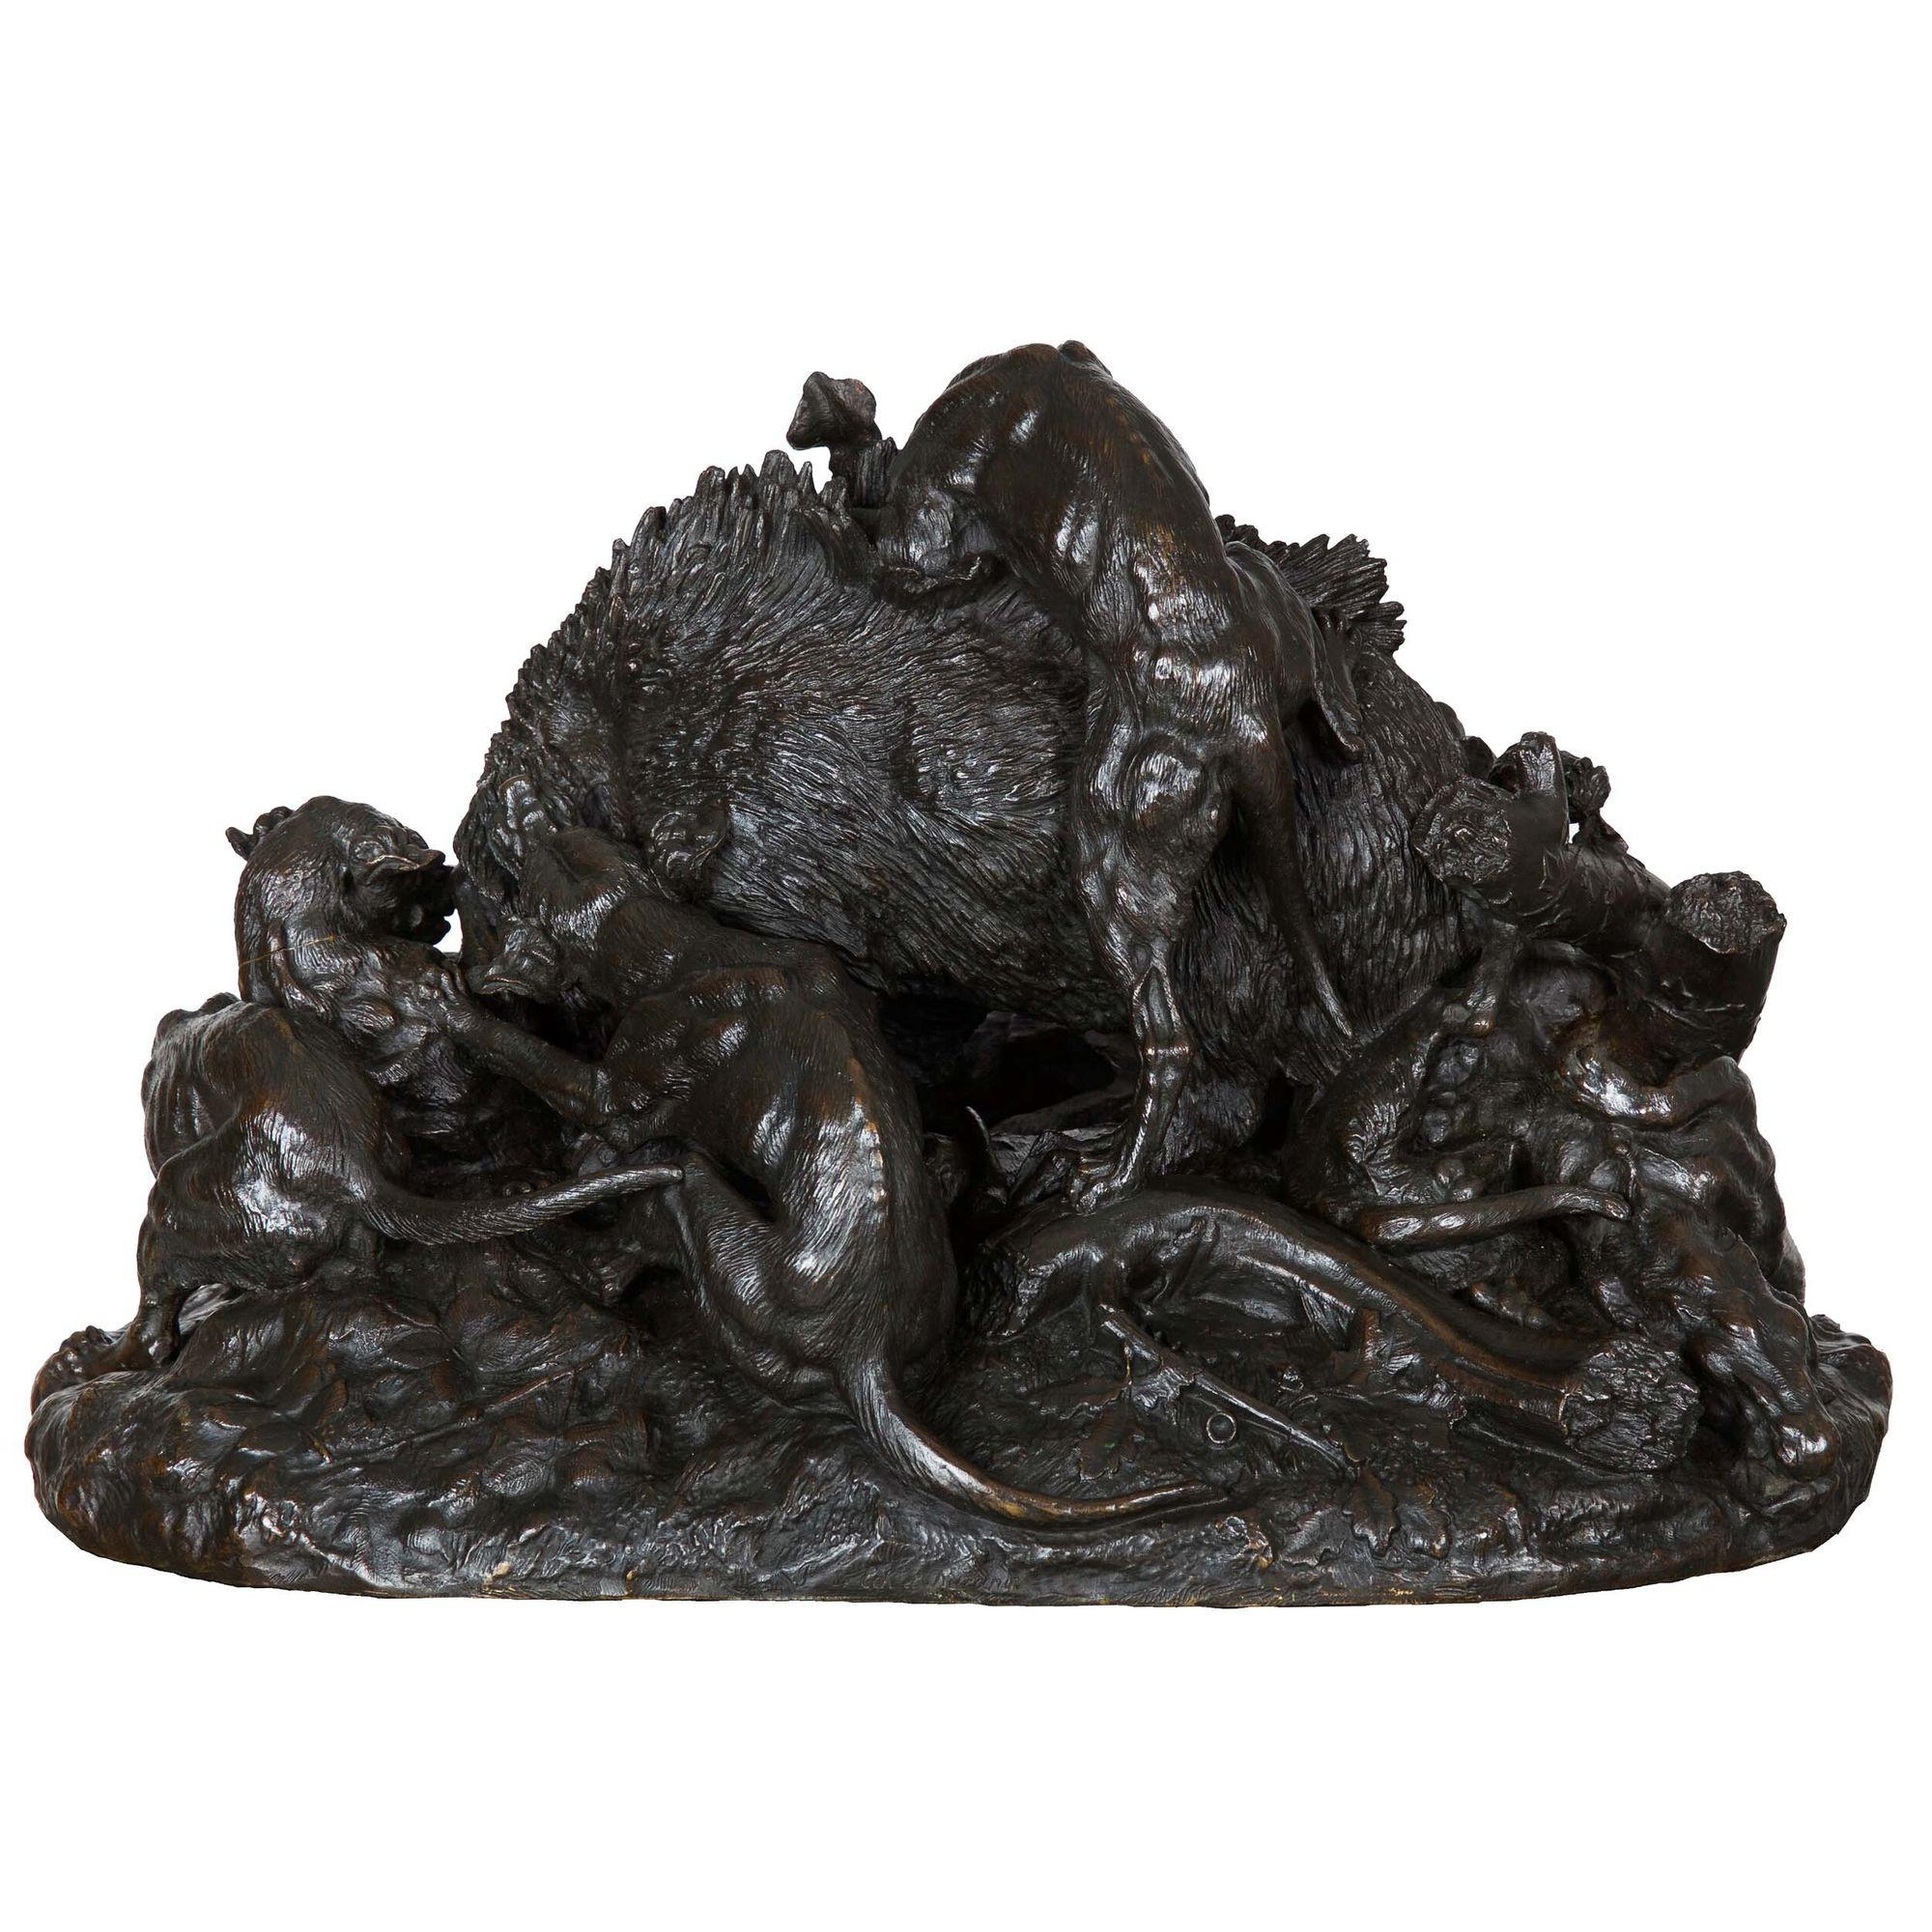 Rare French Antique Bronze Sculpture “Wild Boar Hunt” by Auguste Lechesne In Good Condition For Sale In Shippensburg, PA